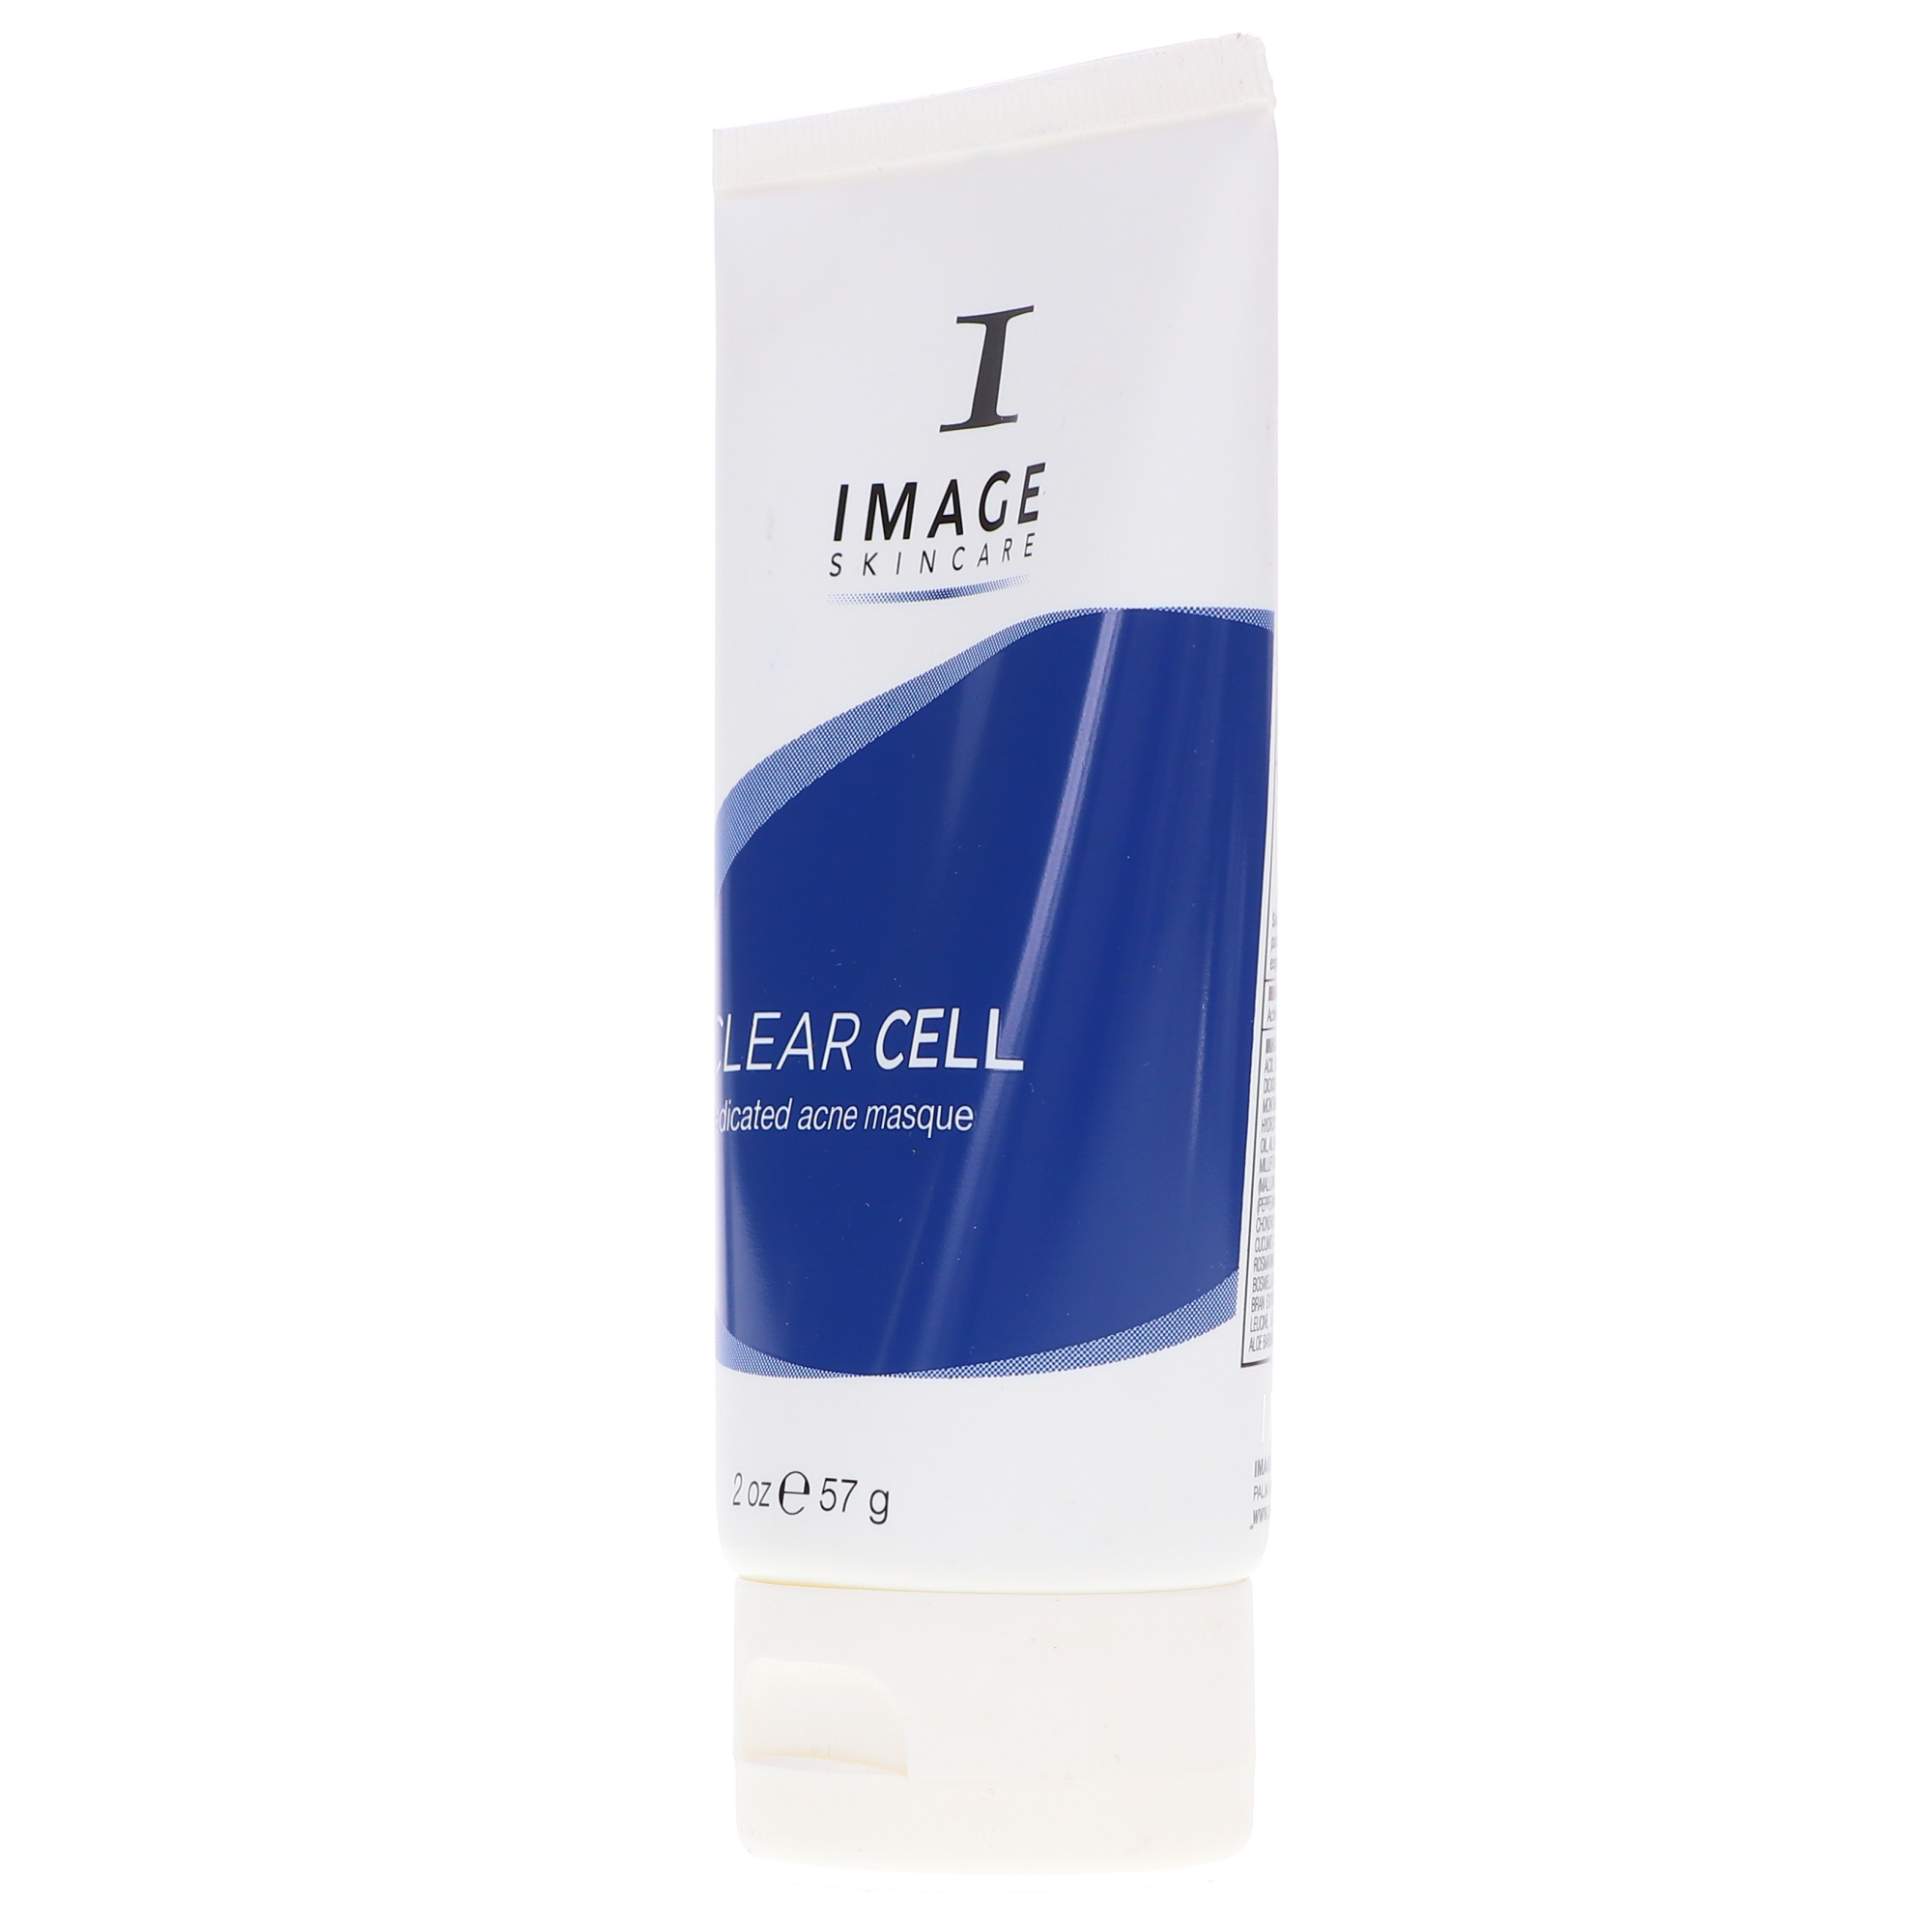 IMAGE Skincare Clear Cell Medicated Acne Masque 2 oz - image 2 of 8